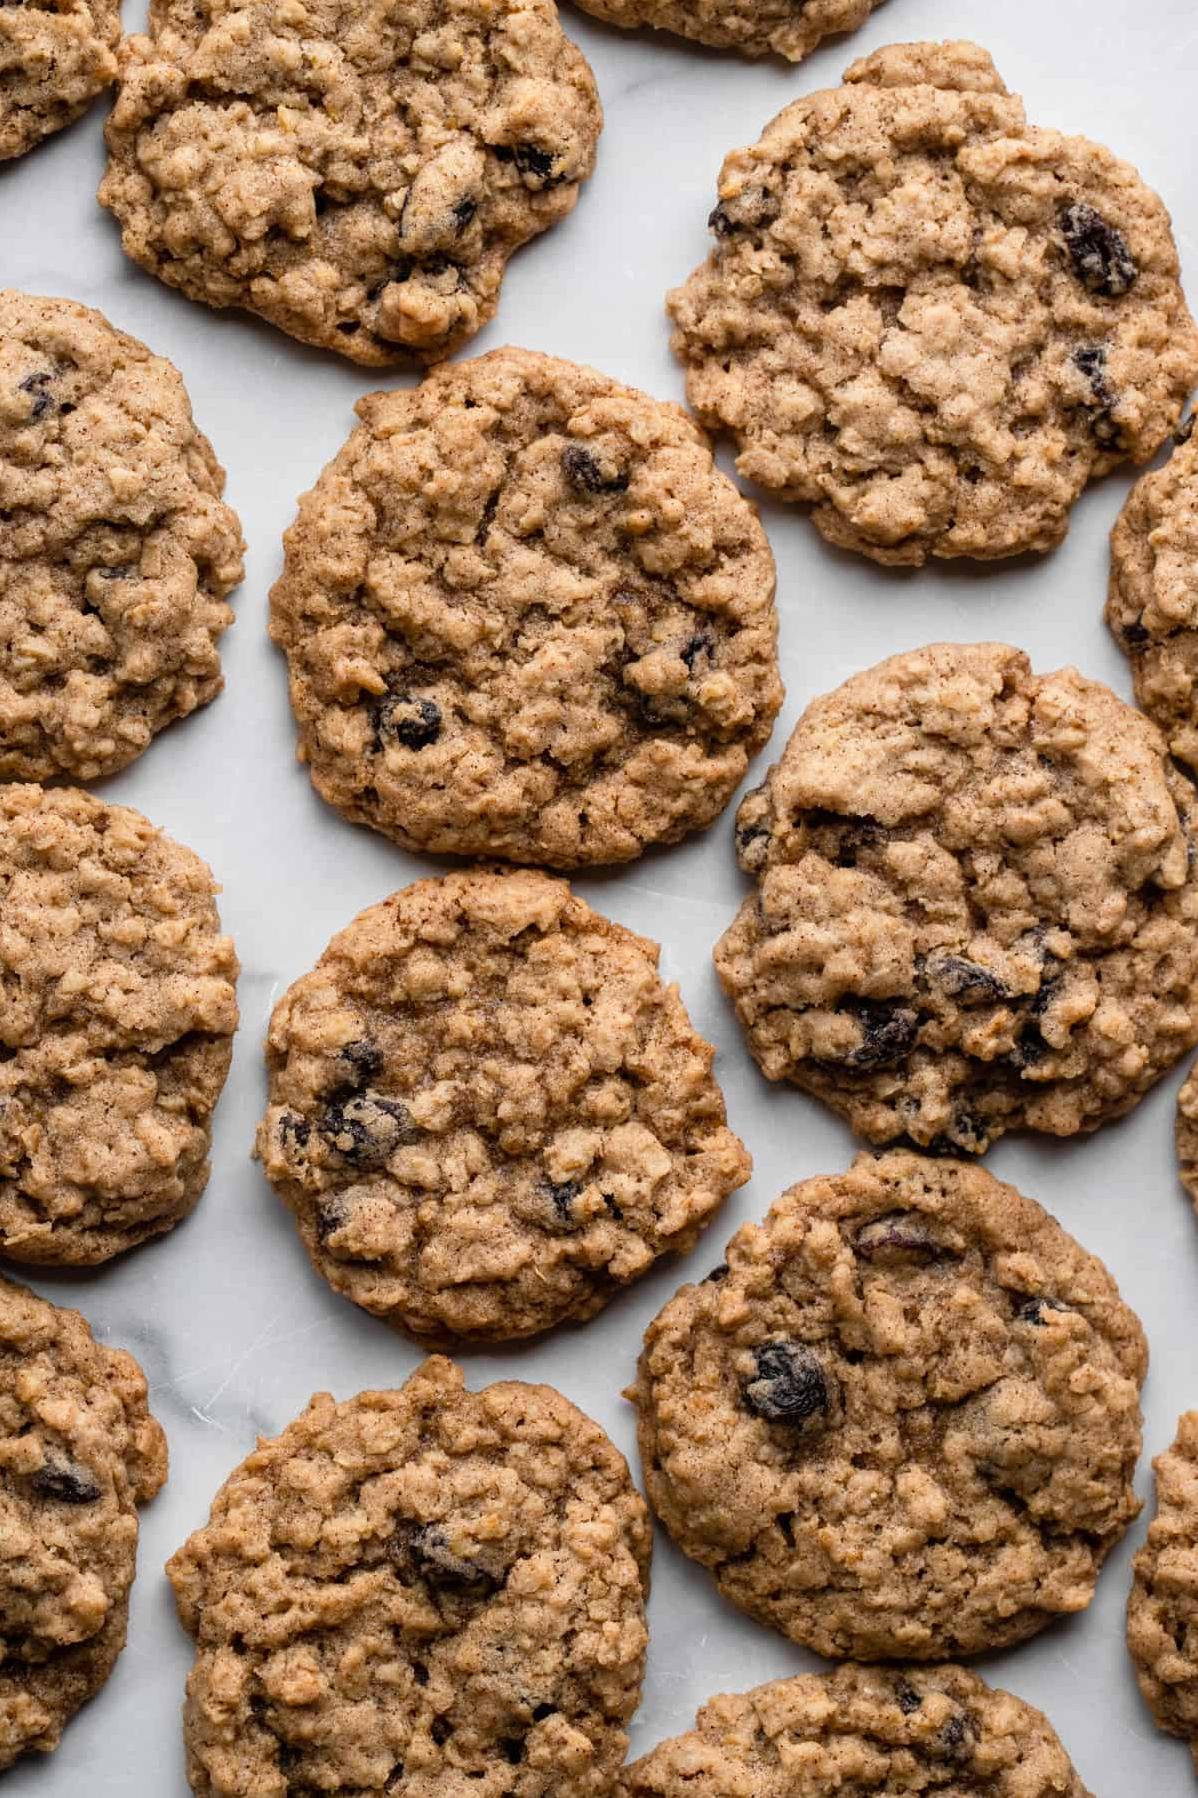  These vegan cookies are a healthier option for satisfying your cookie cravings.